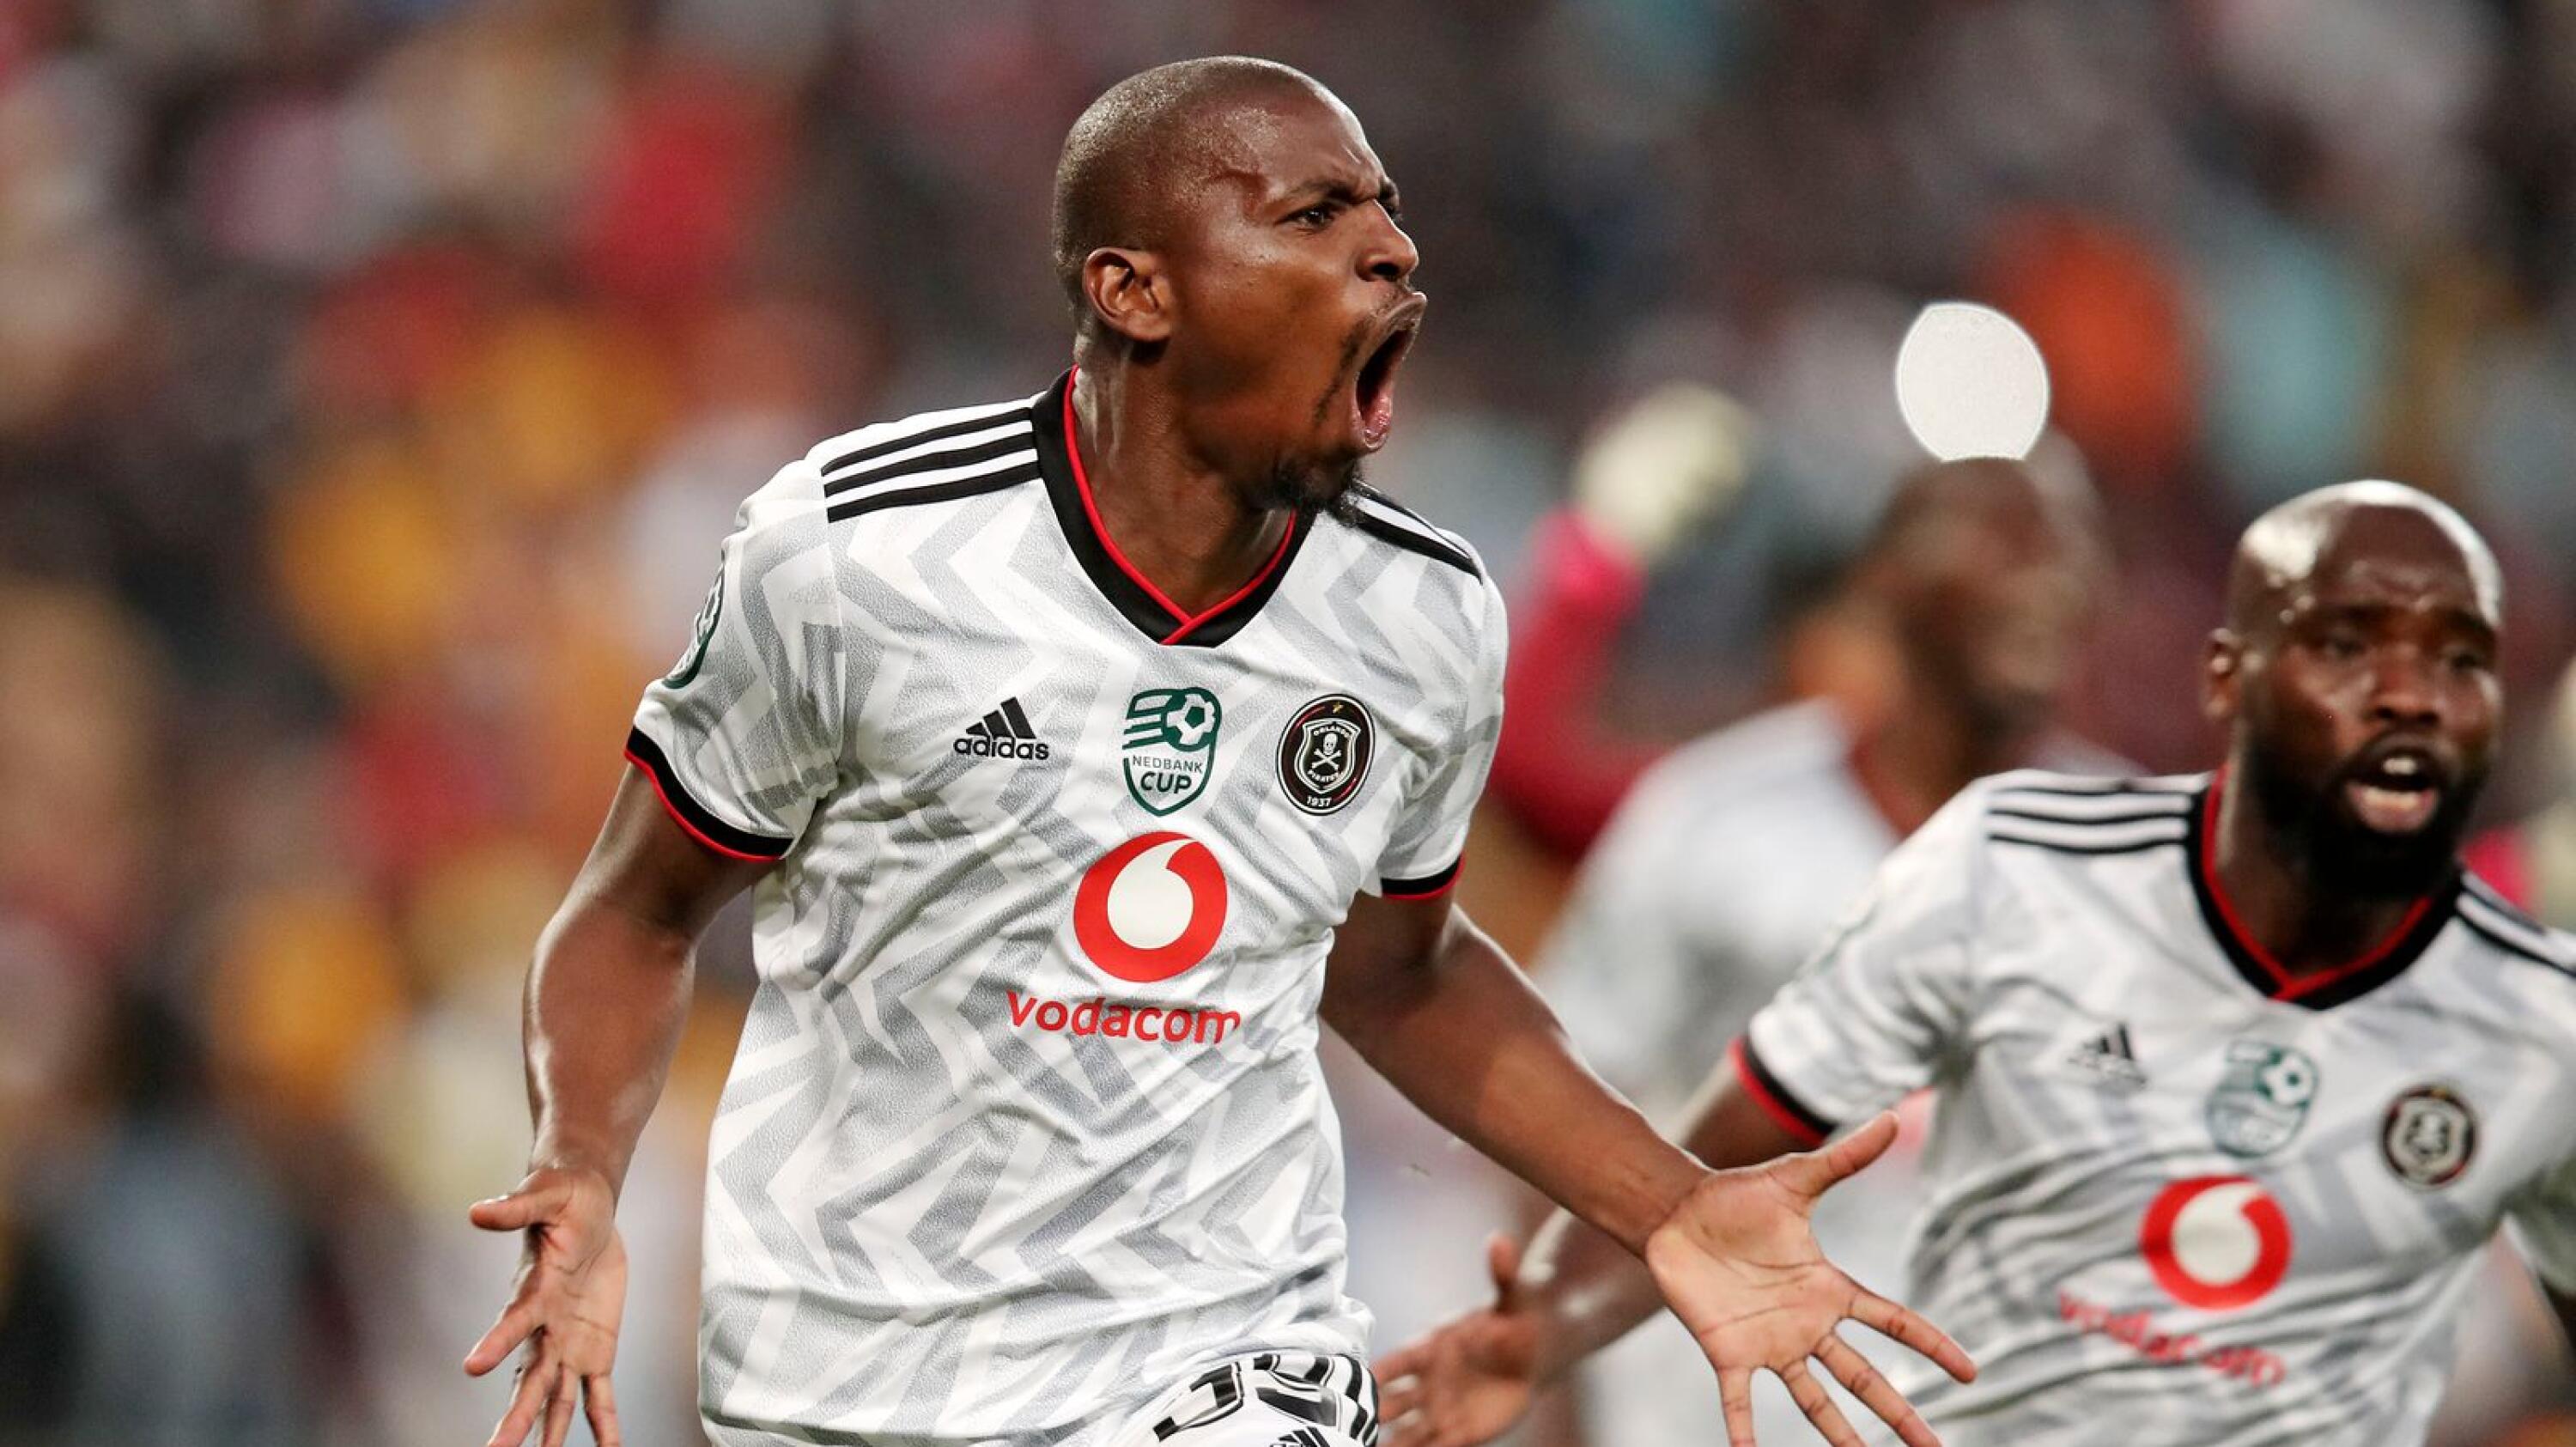 Orlando Pirates’ Sandile Mthethwa celebrates after scoring the winning goal during their Nedbank Cup semi-final against Kaizer Chiefs at FNB Stadium on Saturday